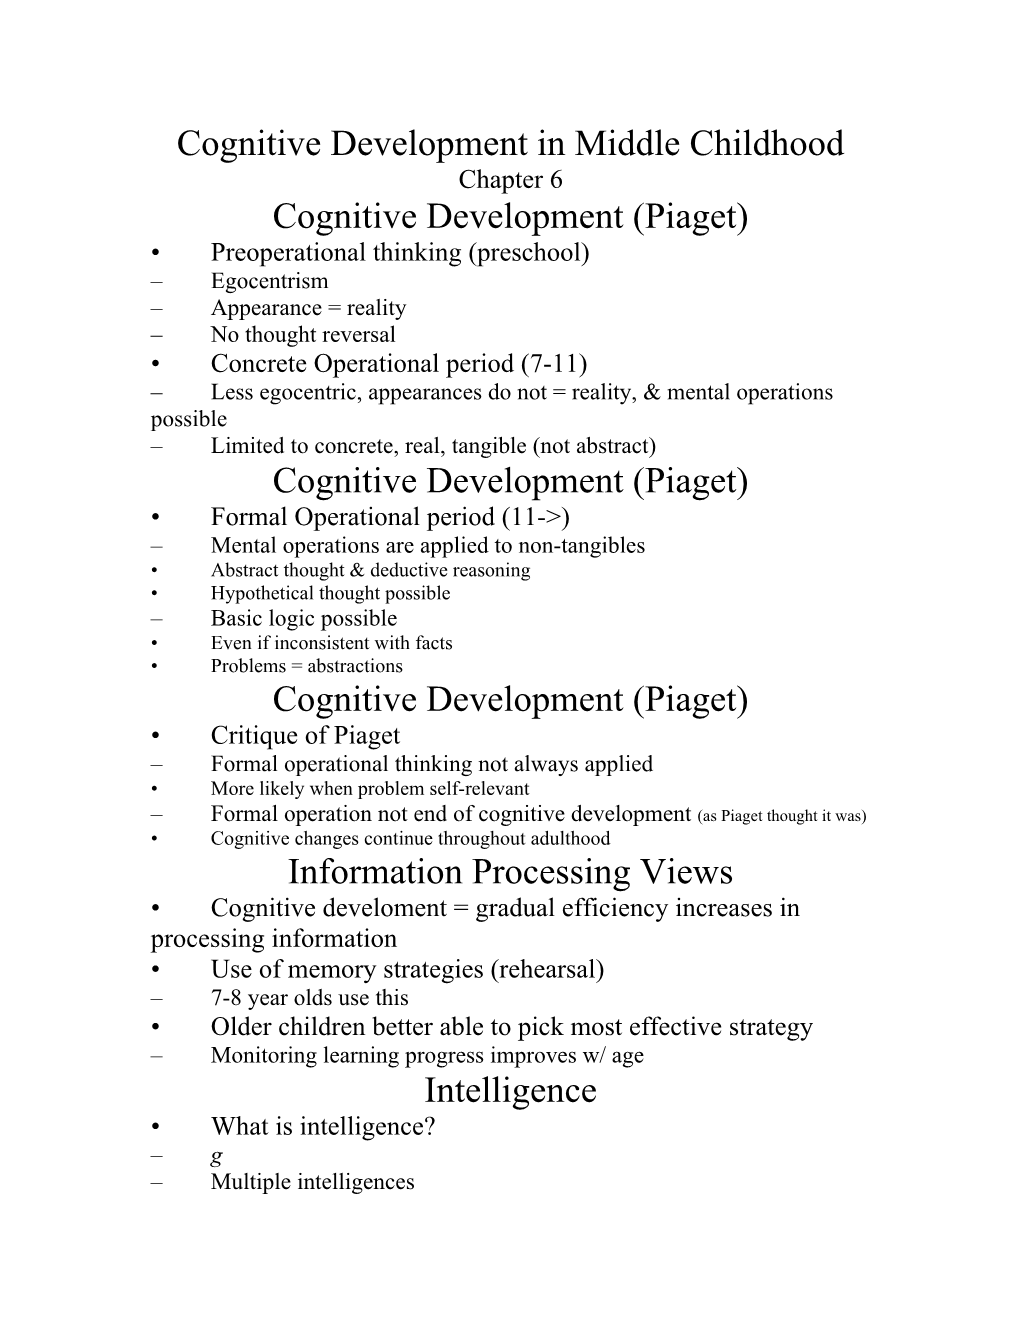 Cognitive Development in Middle Childhood s1